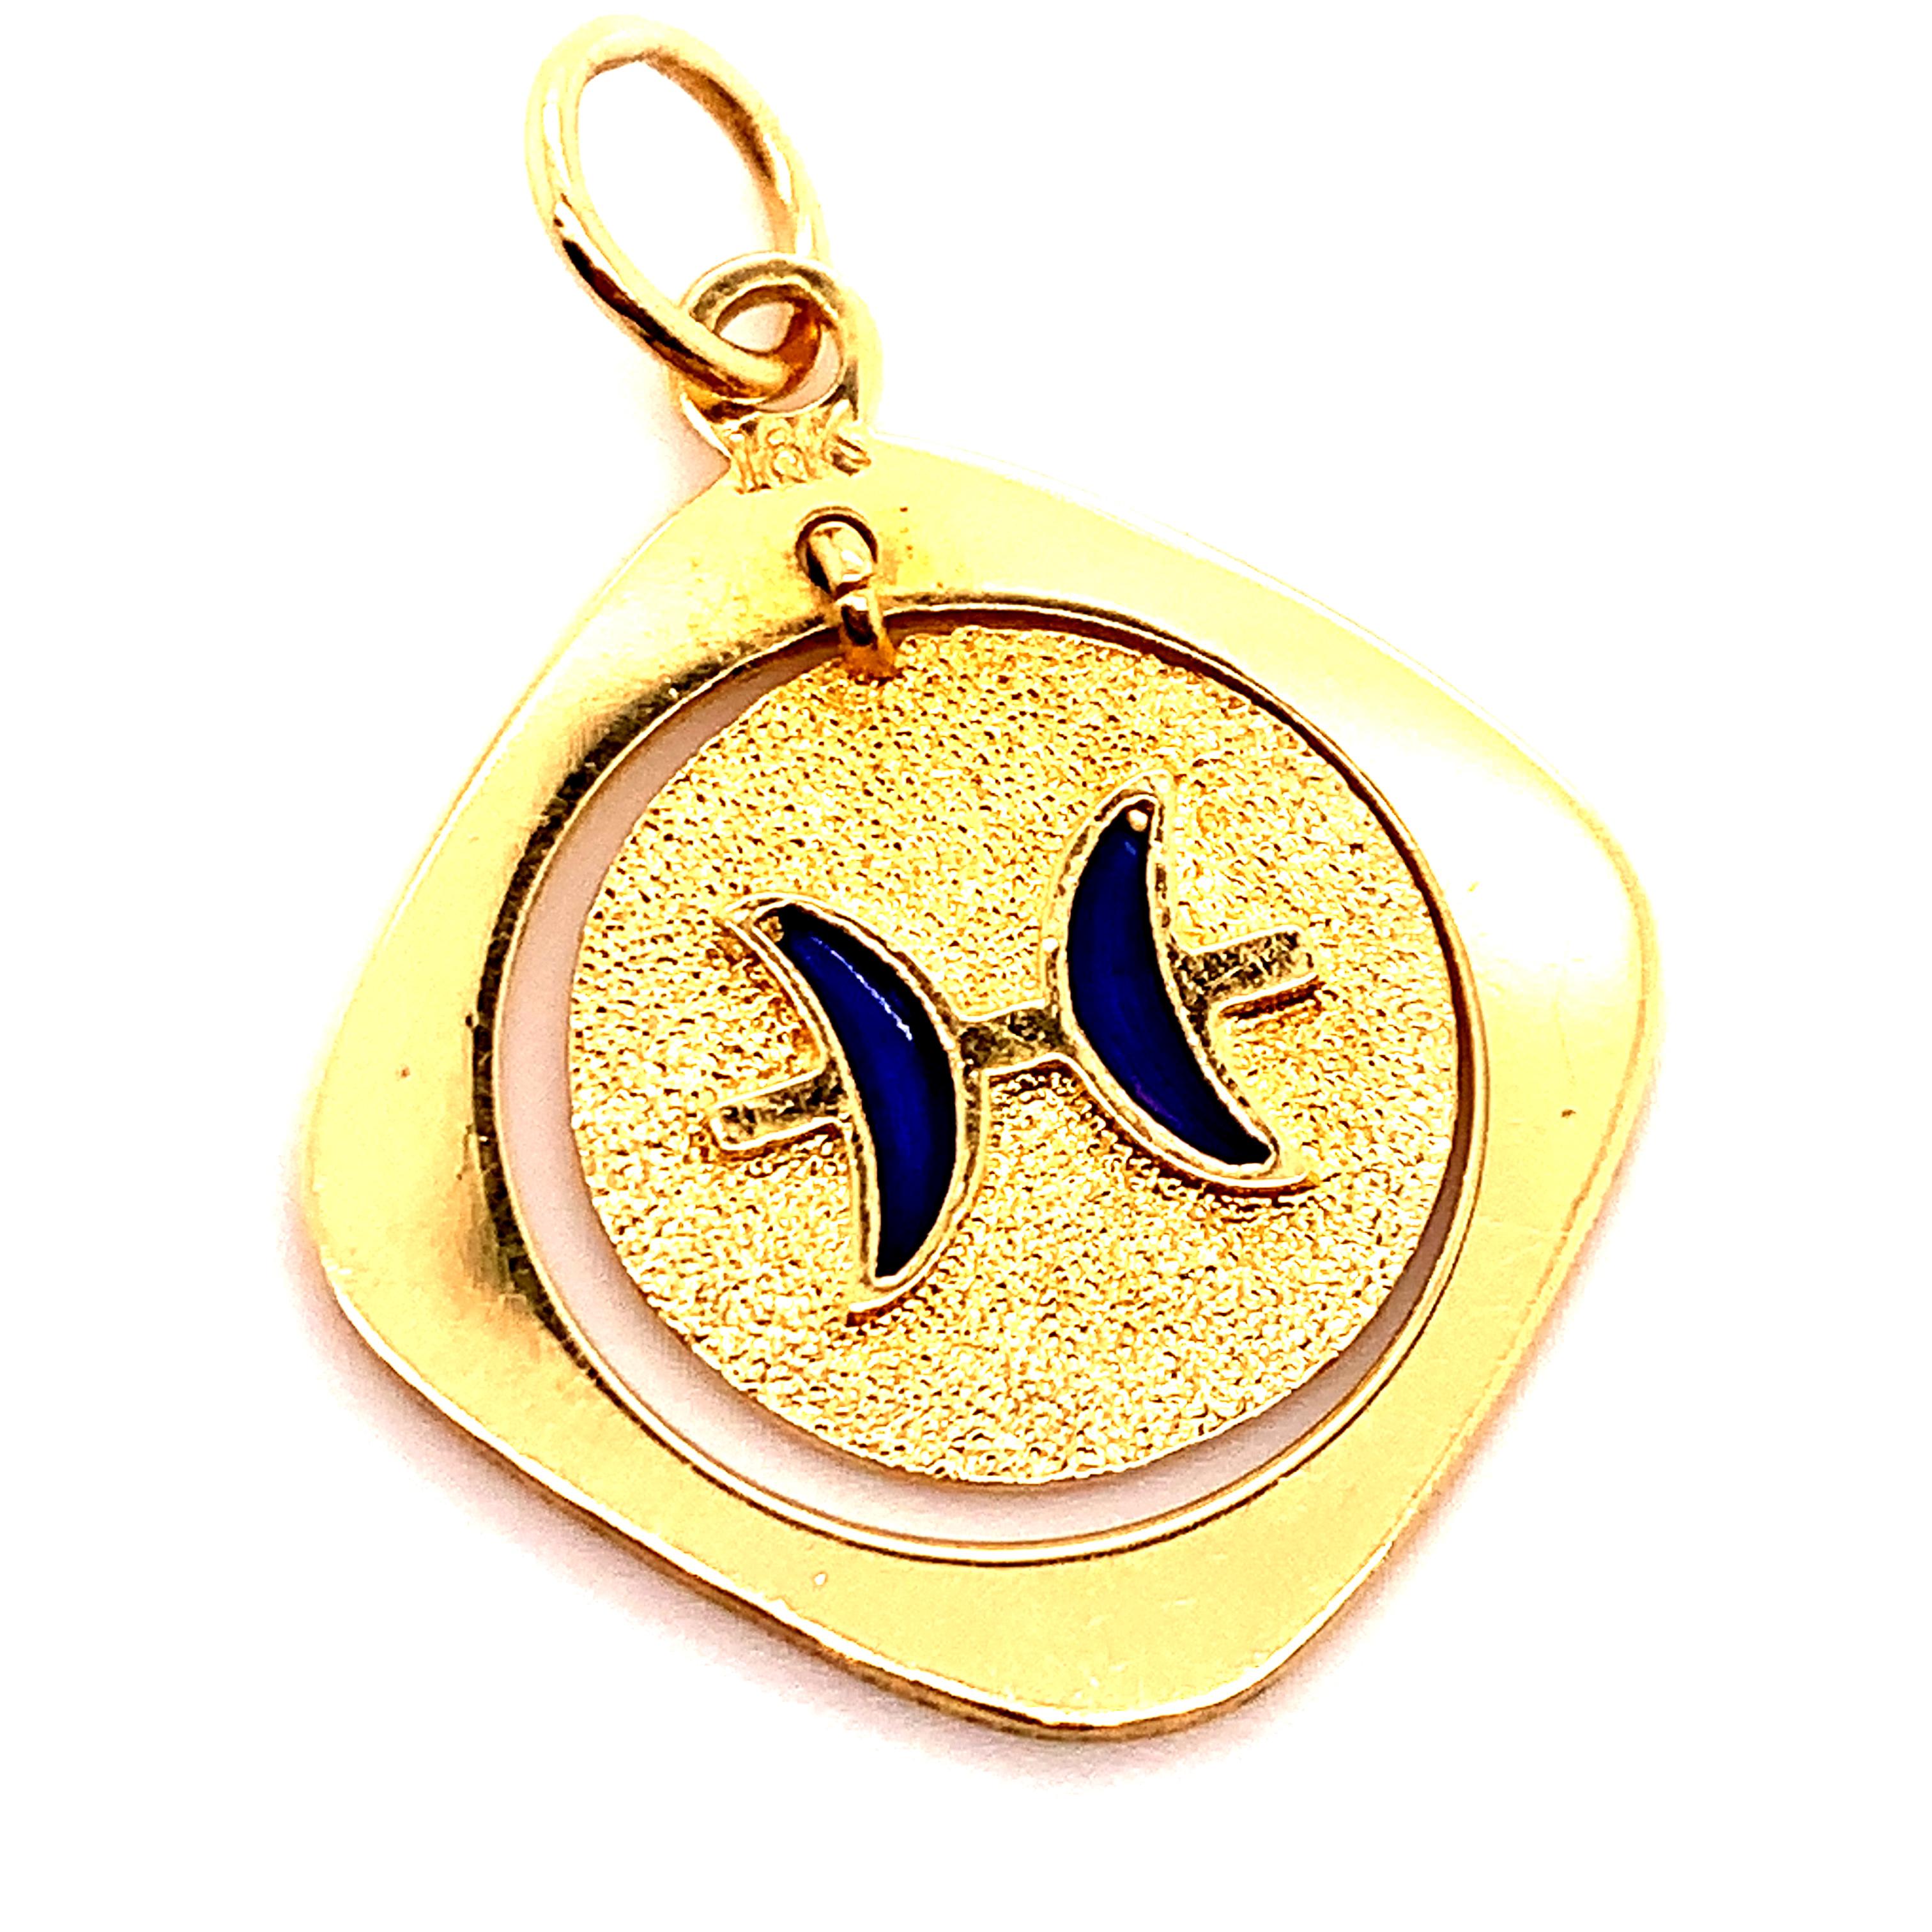 Charming charm: a round charm with two blue enamel fish on the front and a blue enamel PISCES symbol on the back.  The charm is suspended within  a softly curved diamond-shaped setting.  The round charm, 18K textured gold,  is moveable. The outer